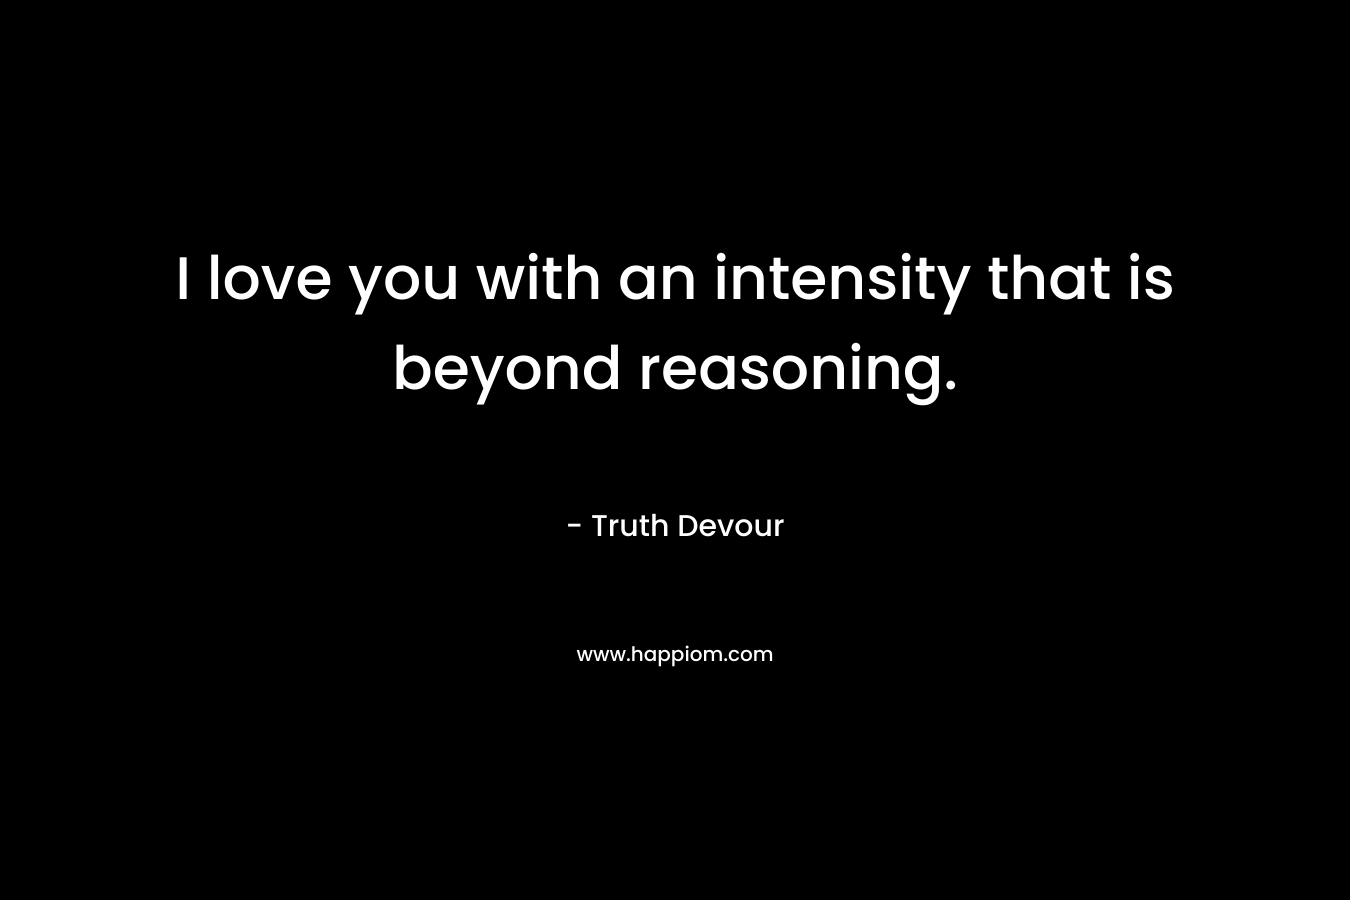 I love you with an intensity that is beyond reasoning. – Truth Devour